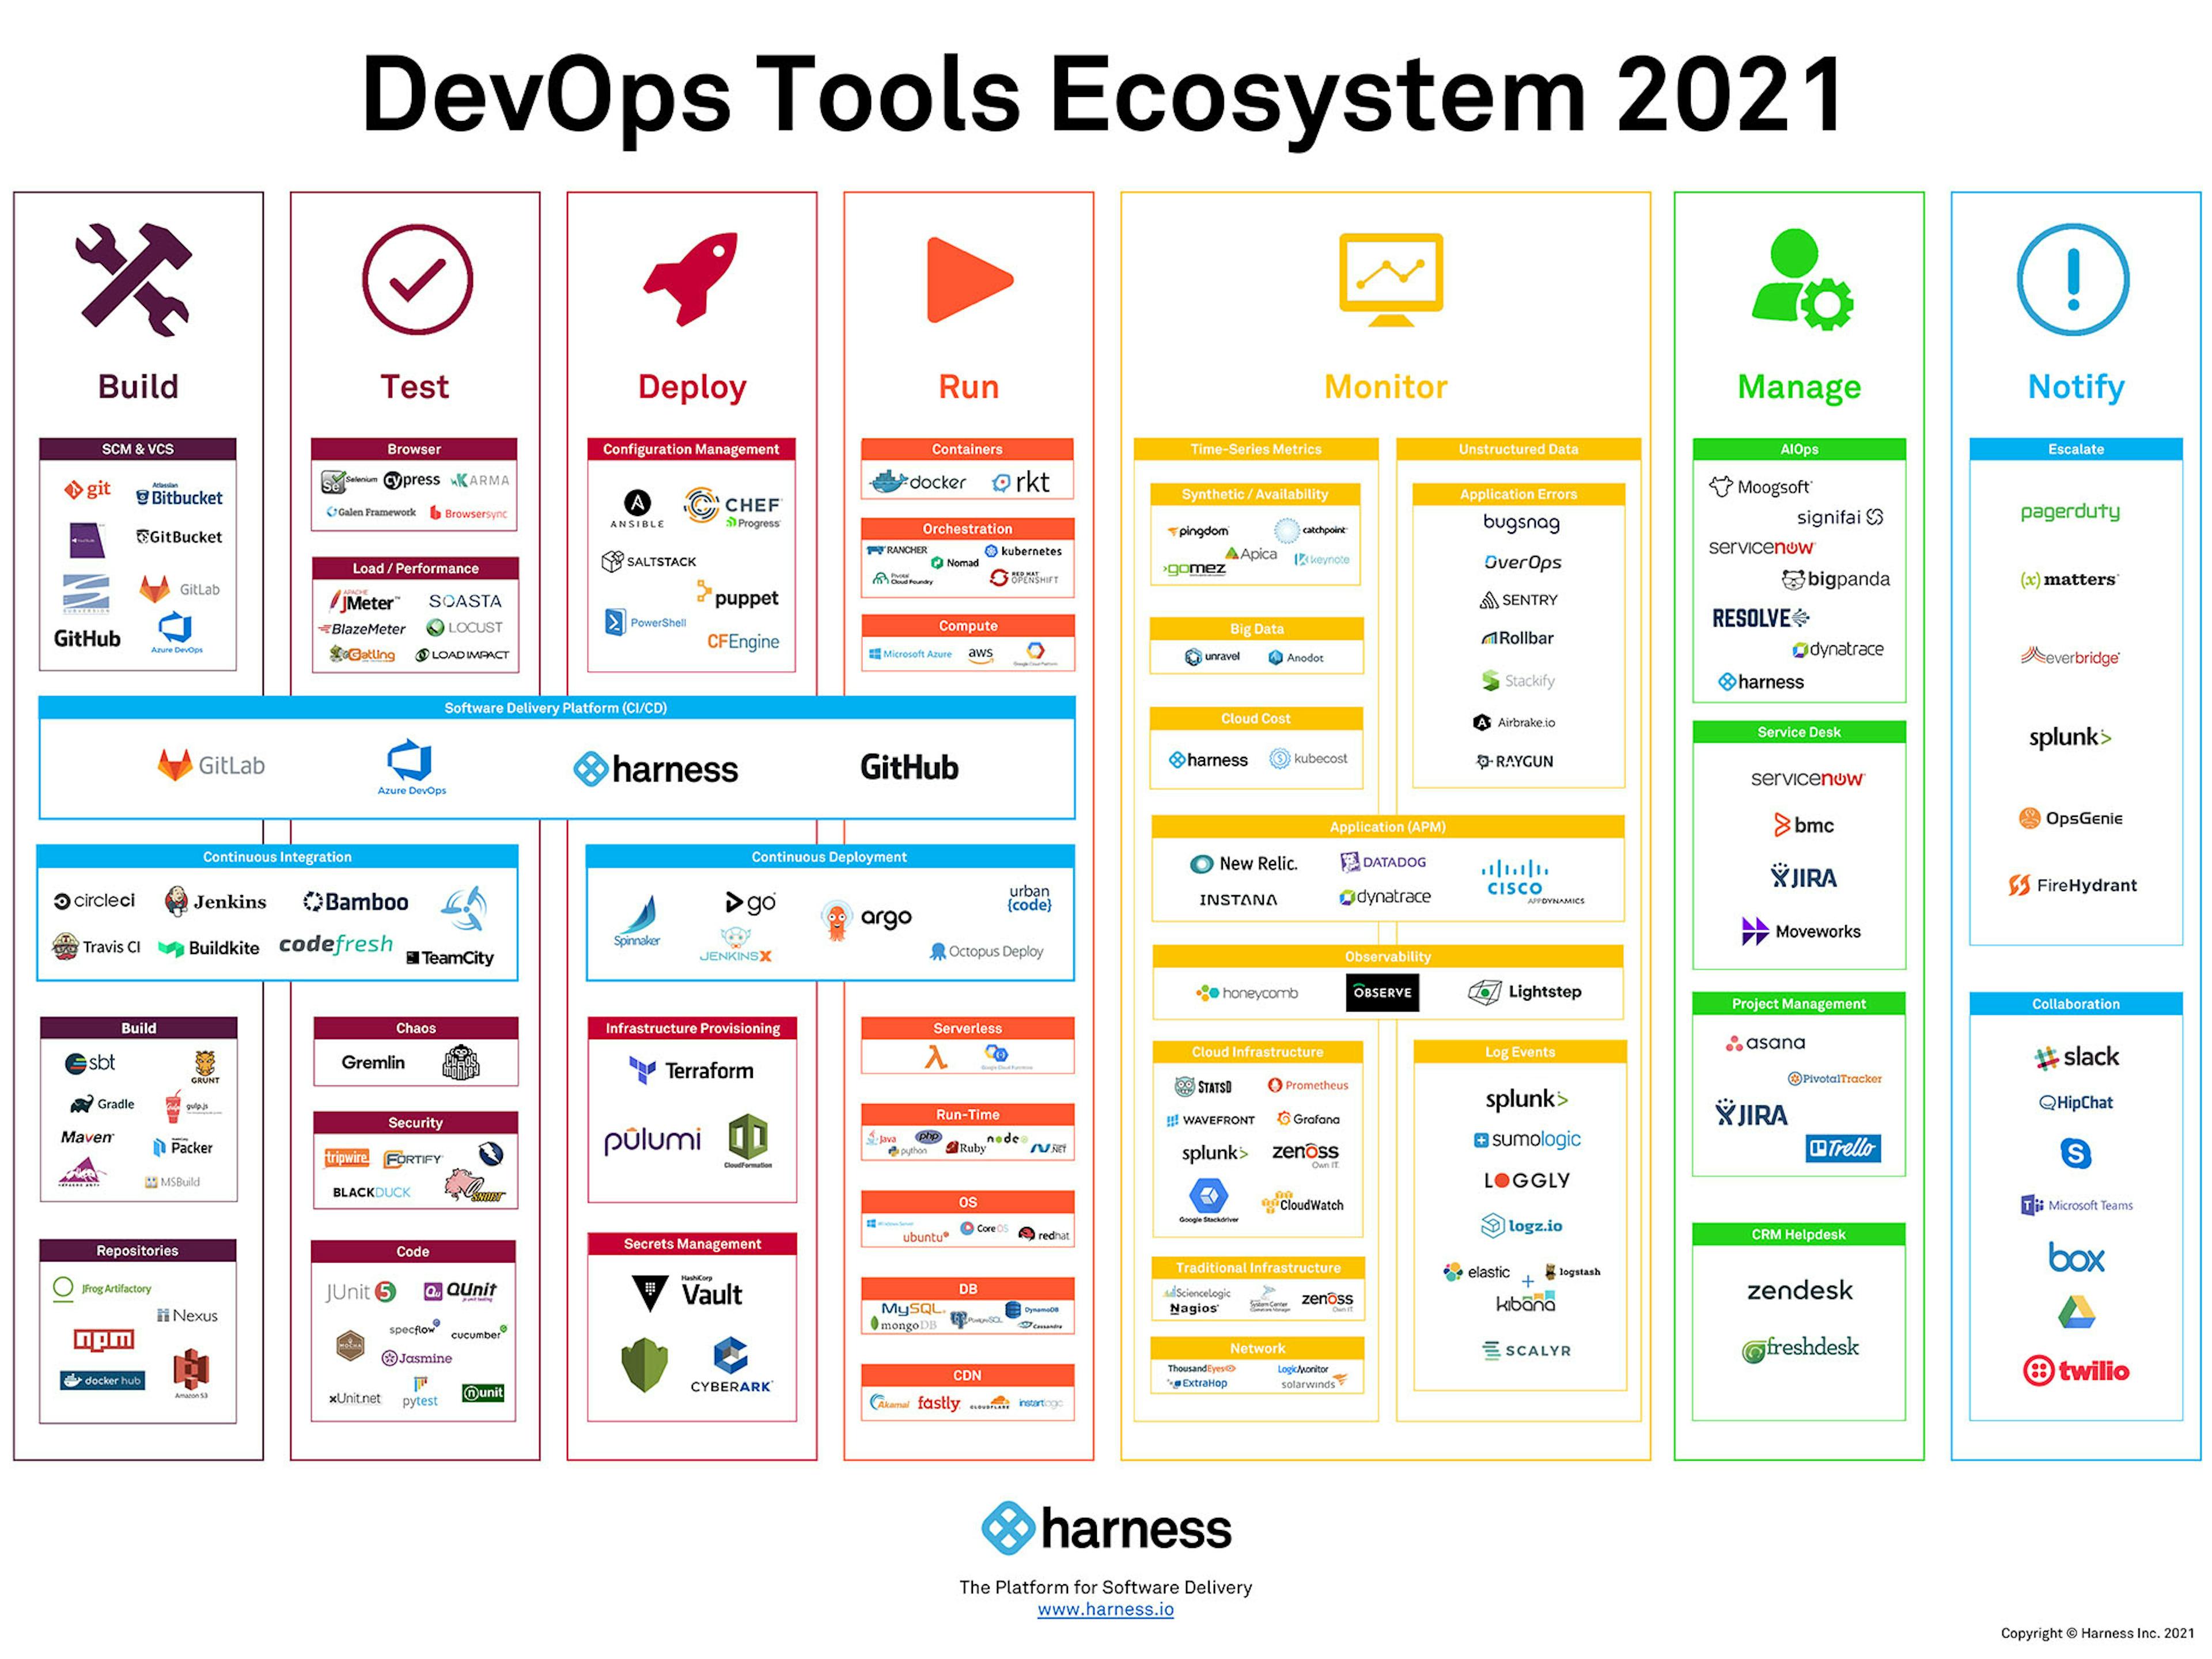 A typical CI/CD toolset (source: https://vedcraft.com/tech-trends/tech-tips/understand-devops-ecosystem-to-apply-trending-patterns/